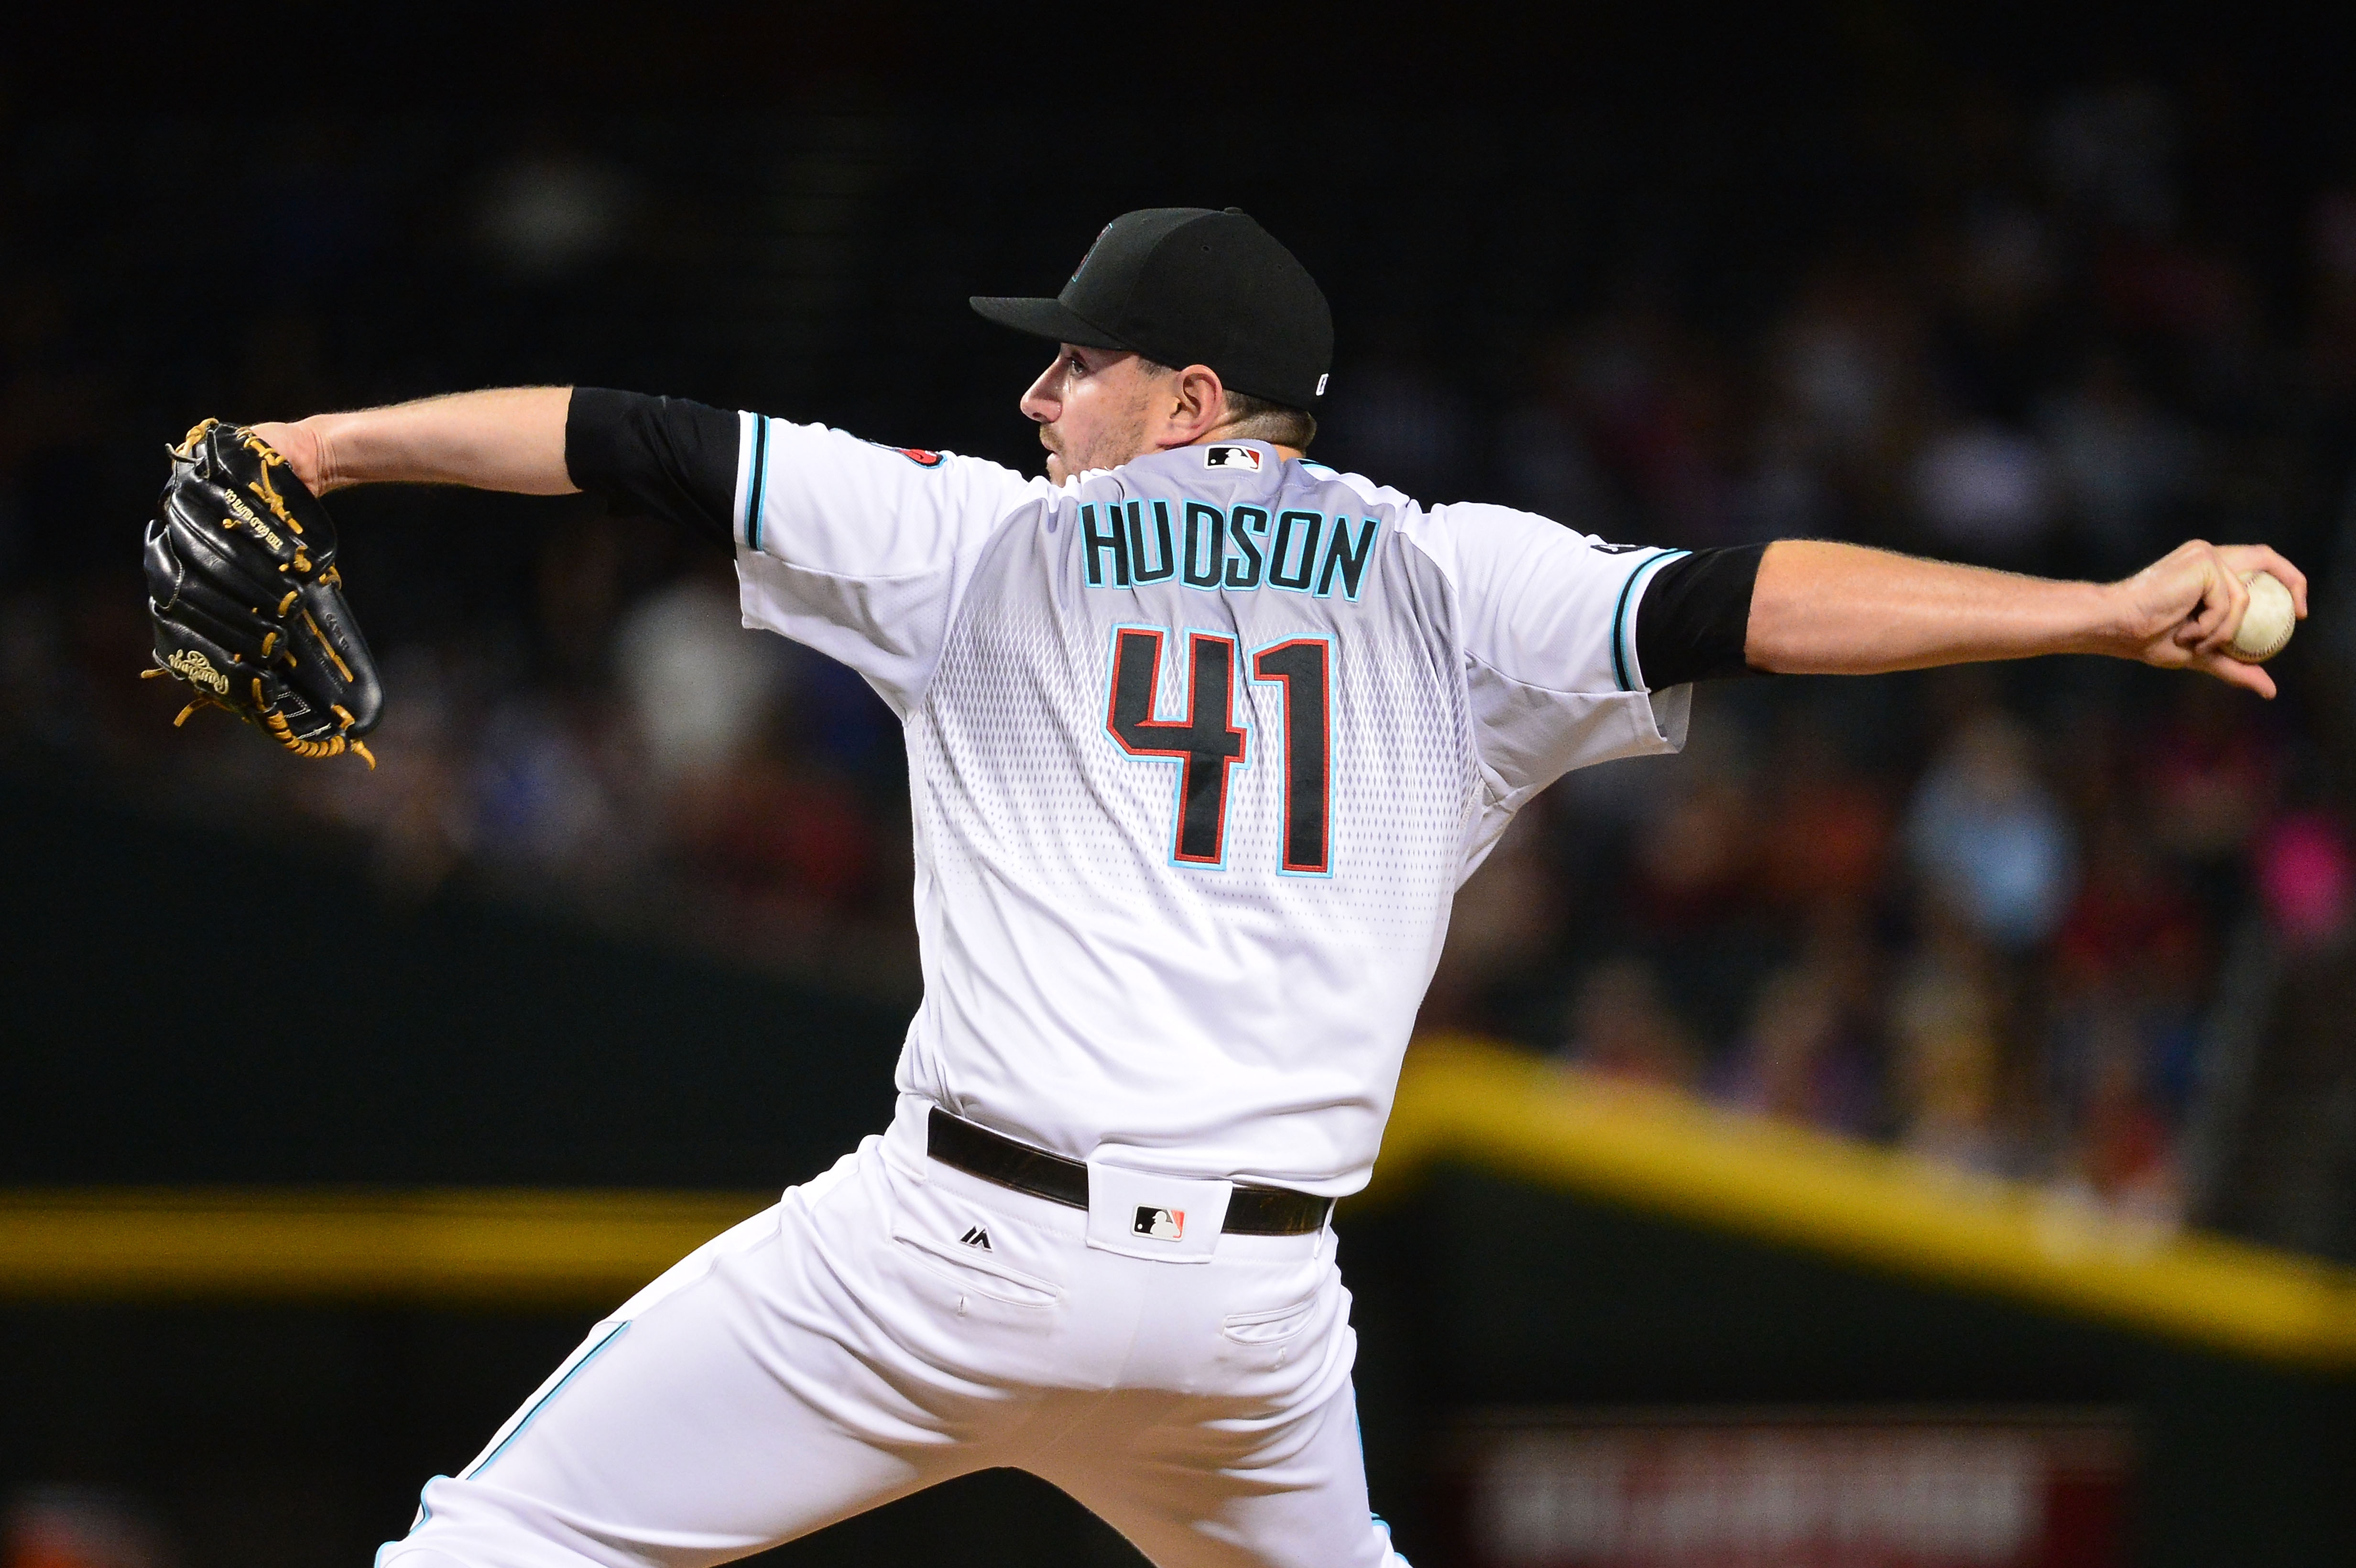 Daniel Hudson is one of a number of players who could be waiting for their market to pick up as the top bullpen arms are signed.